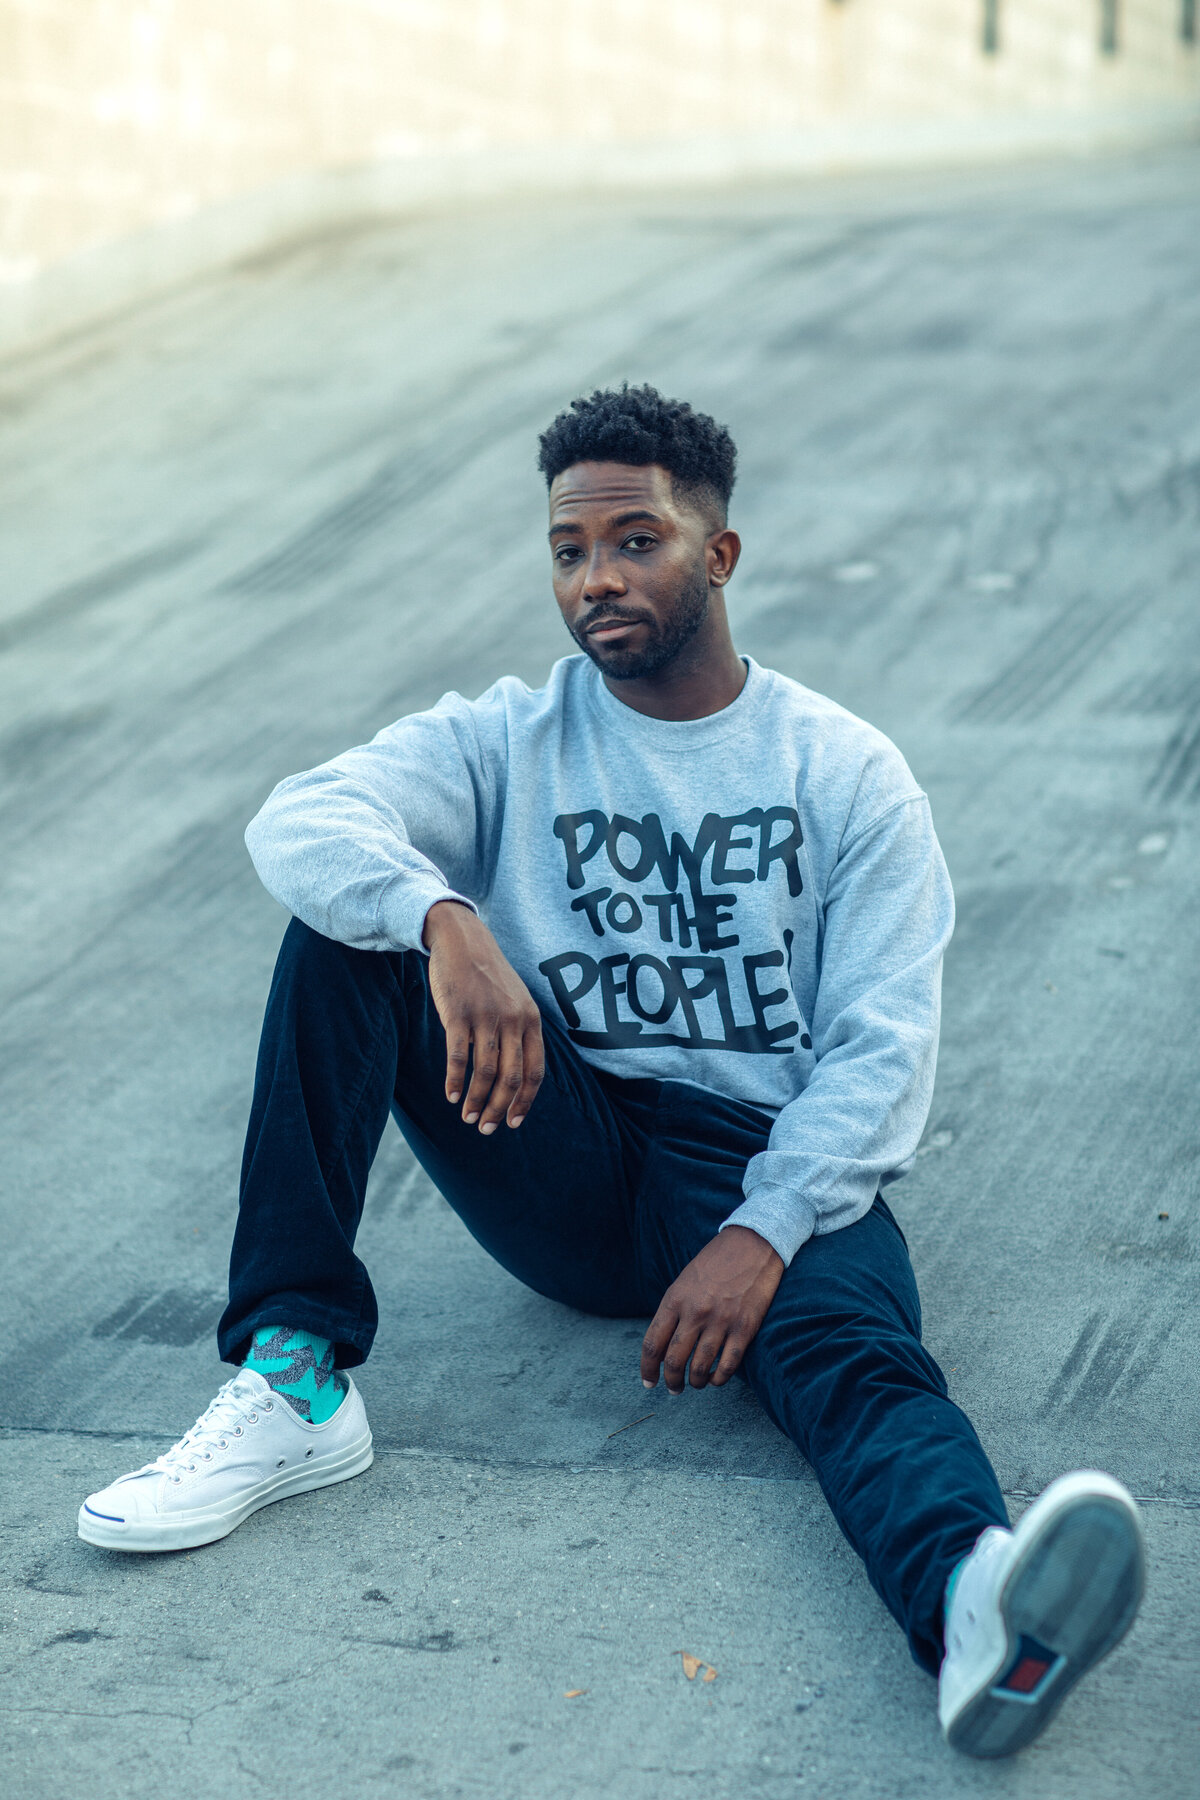 Portrait Photo Of Young Black Man Sitting On a Cement Floor Los Angeles